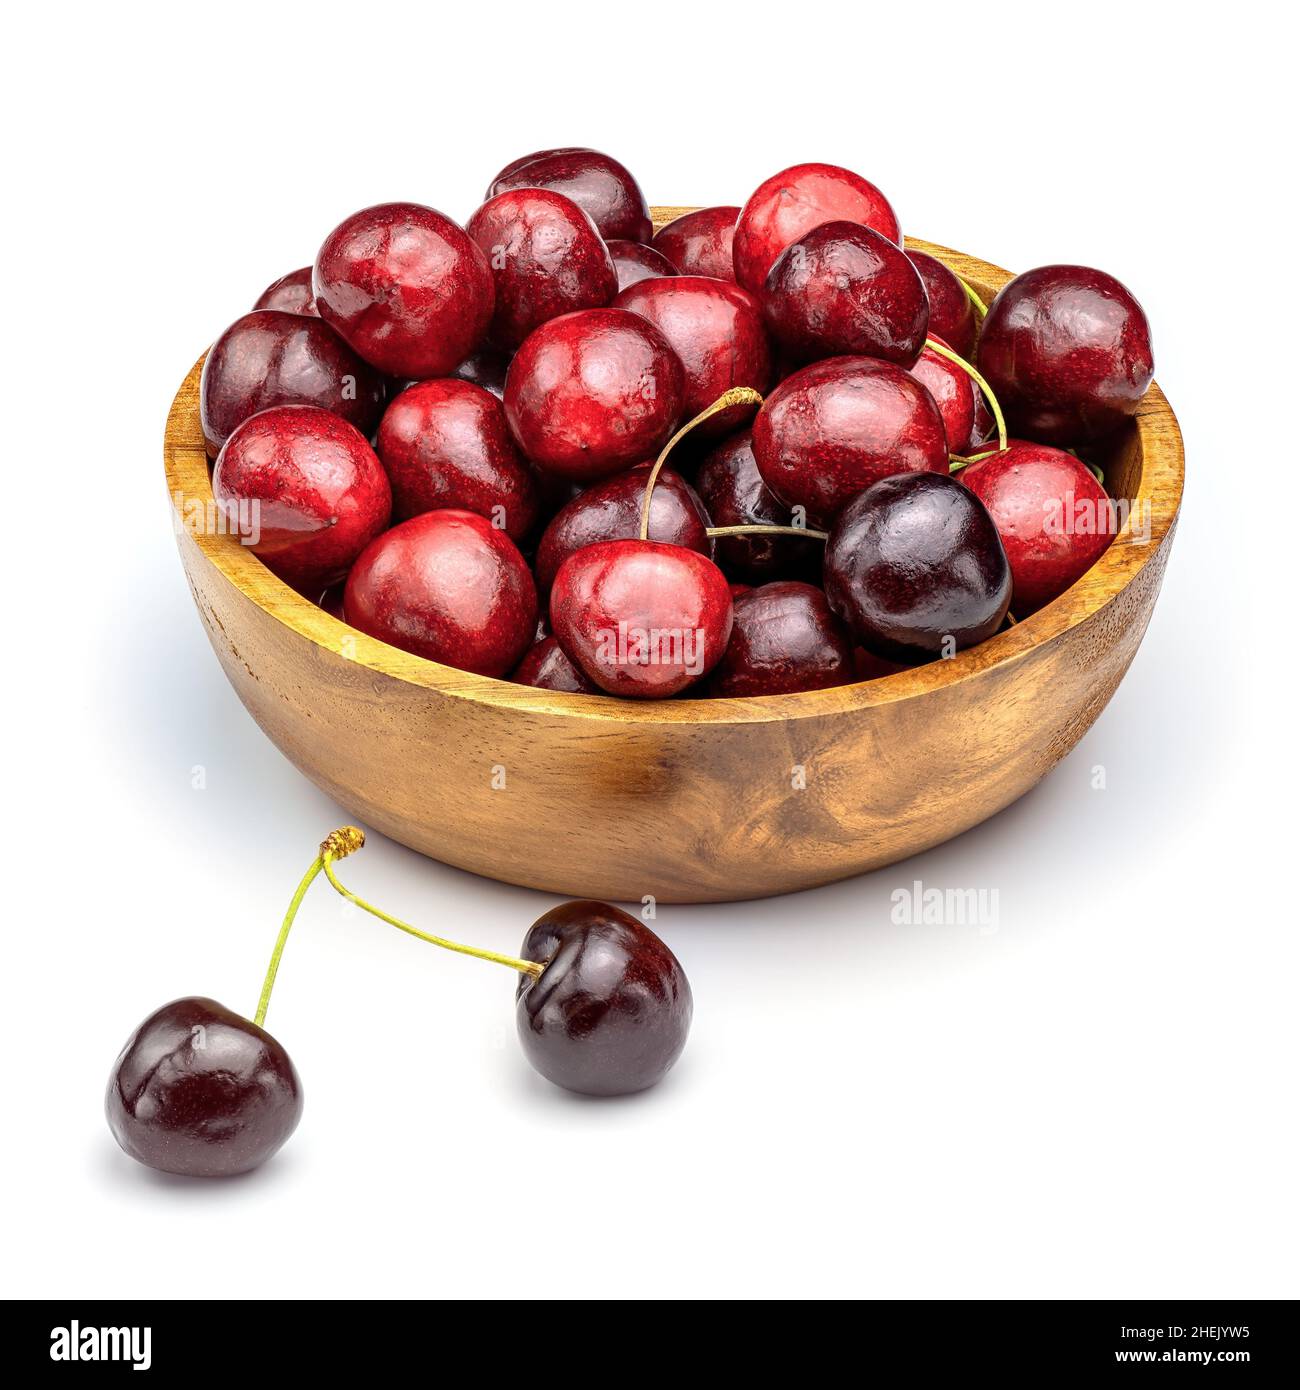 Fresh sweet cherries in wooden bowl isolated on white background. Cherry on white background. Stock Photo